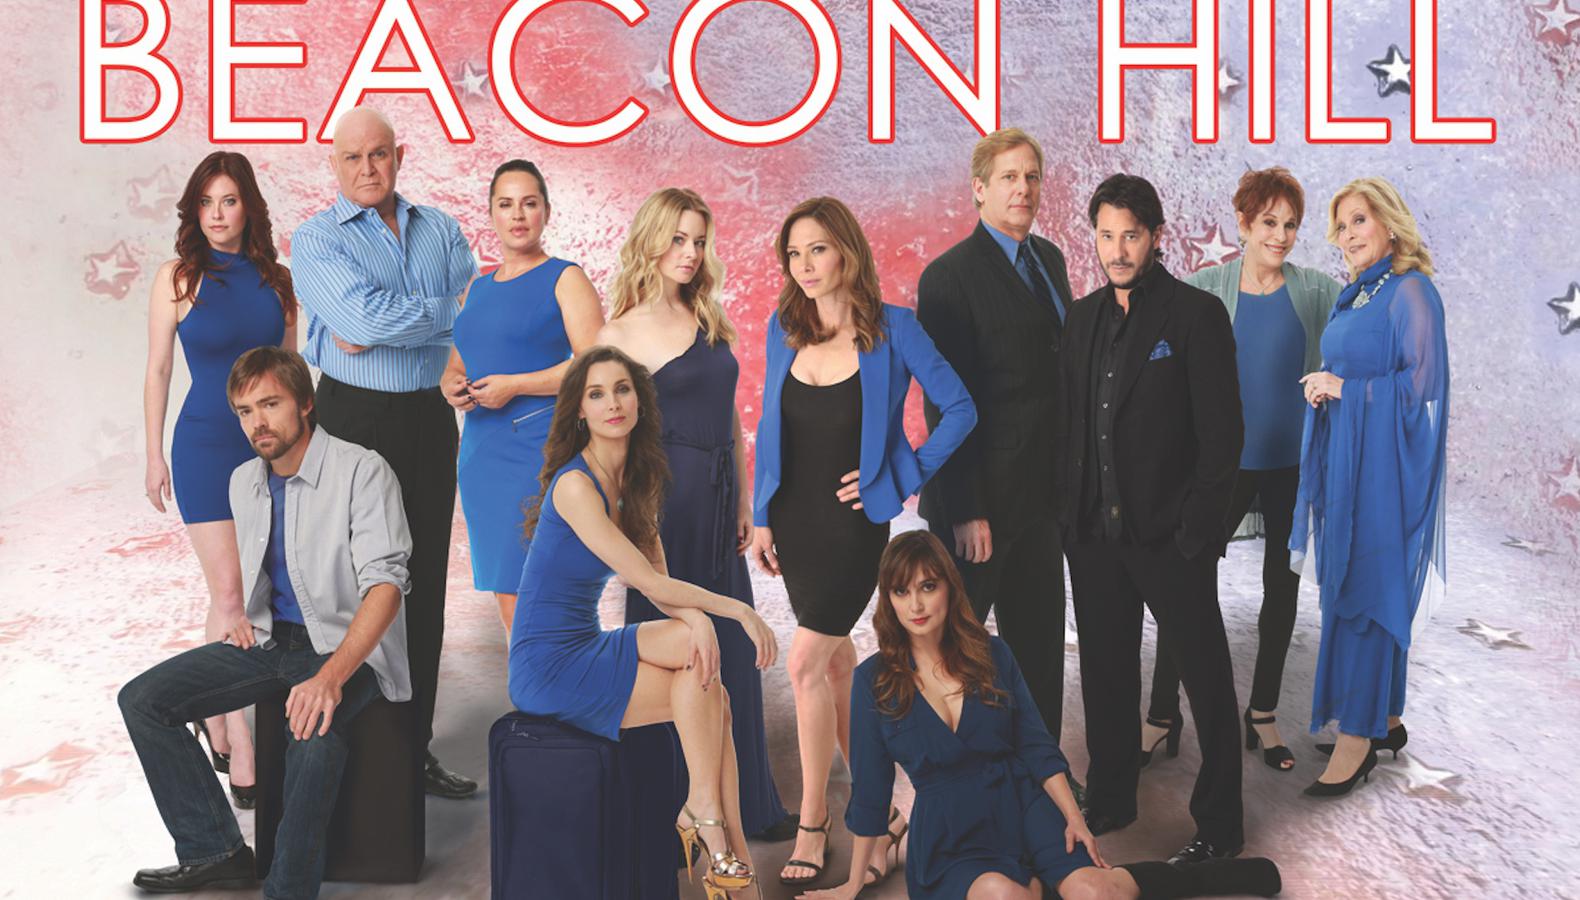 Beacon Hill the Series - Behind the Scenes: About the Production 